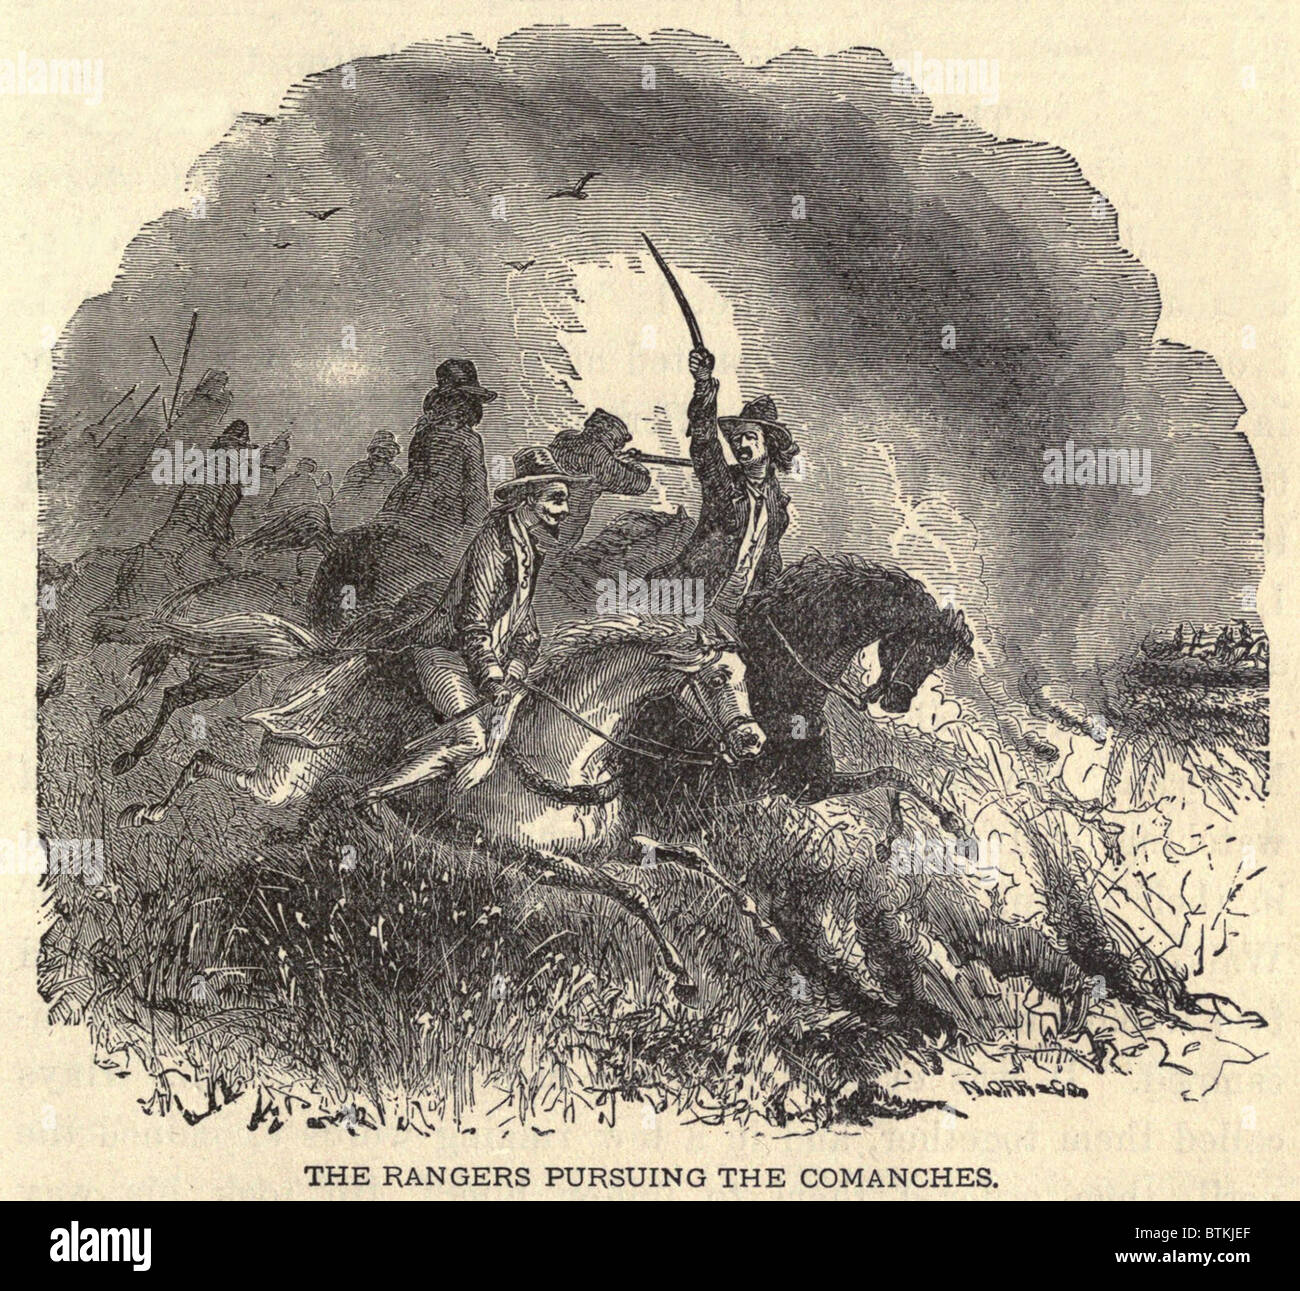 Texas Rangers pursuing Comanches. When the rangers were established in prior to their 'official birth' in 1874, their primary role was to defend settlers against Indians, particularly the Comanche, Tonkawa, and Karankawa tribes. 1883 engraving. Stock Photo